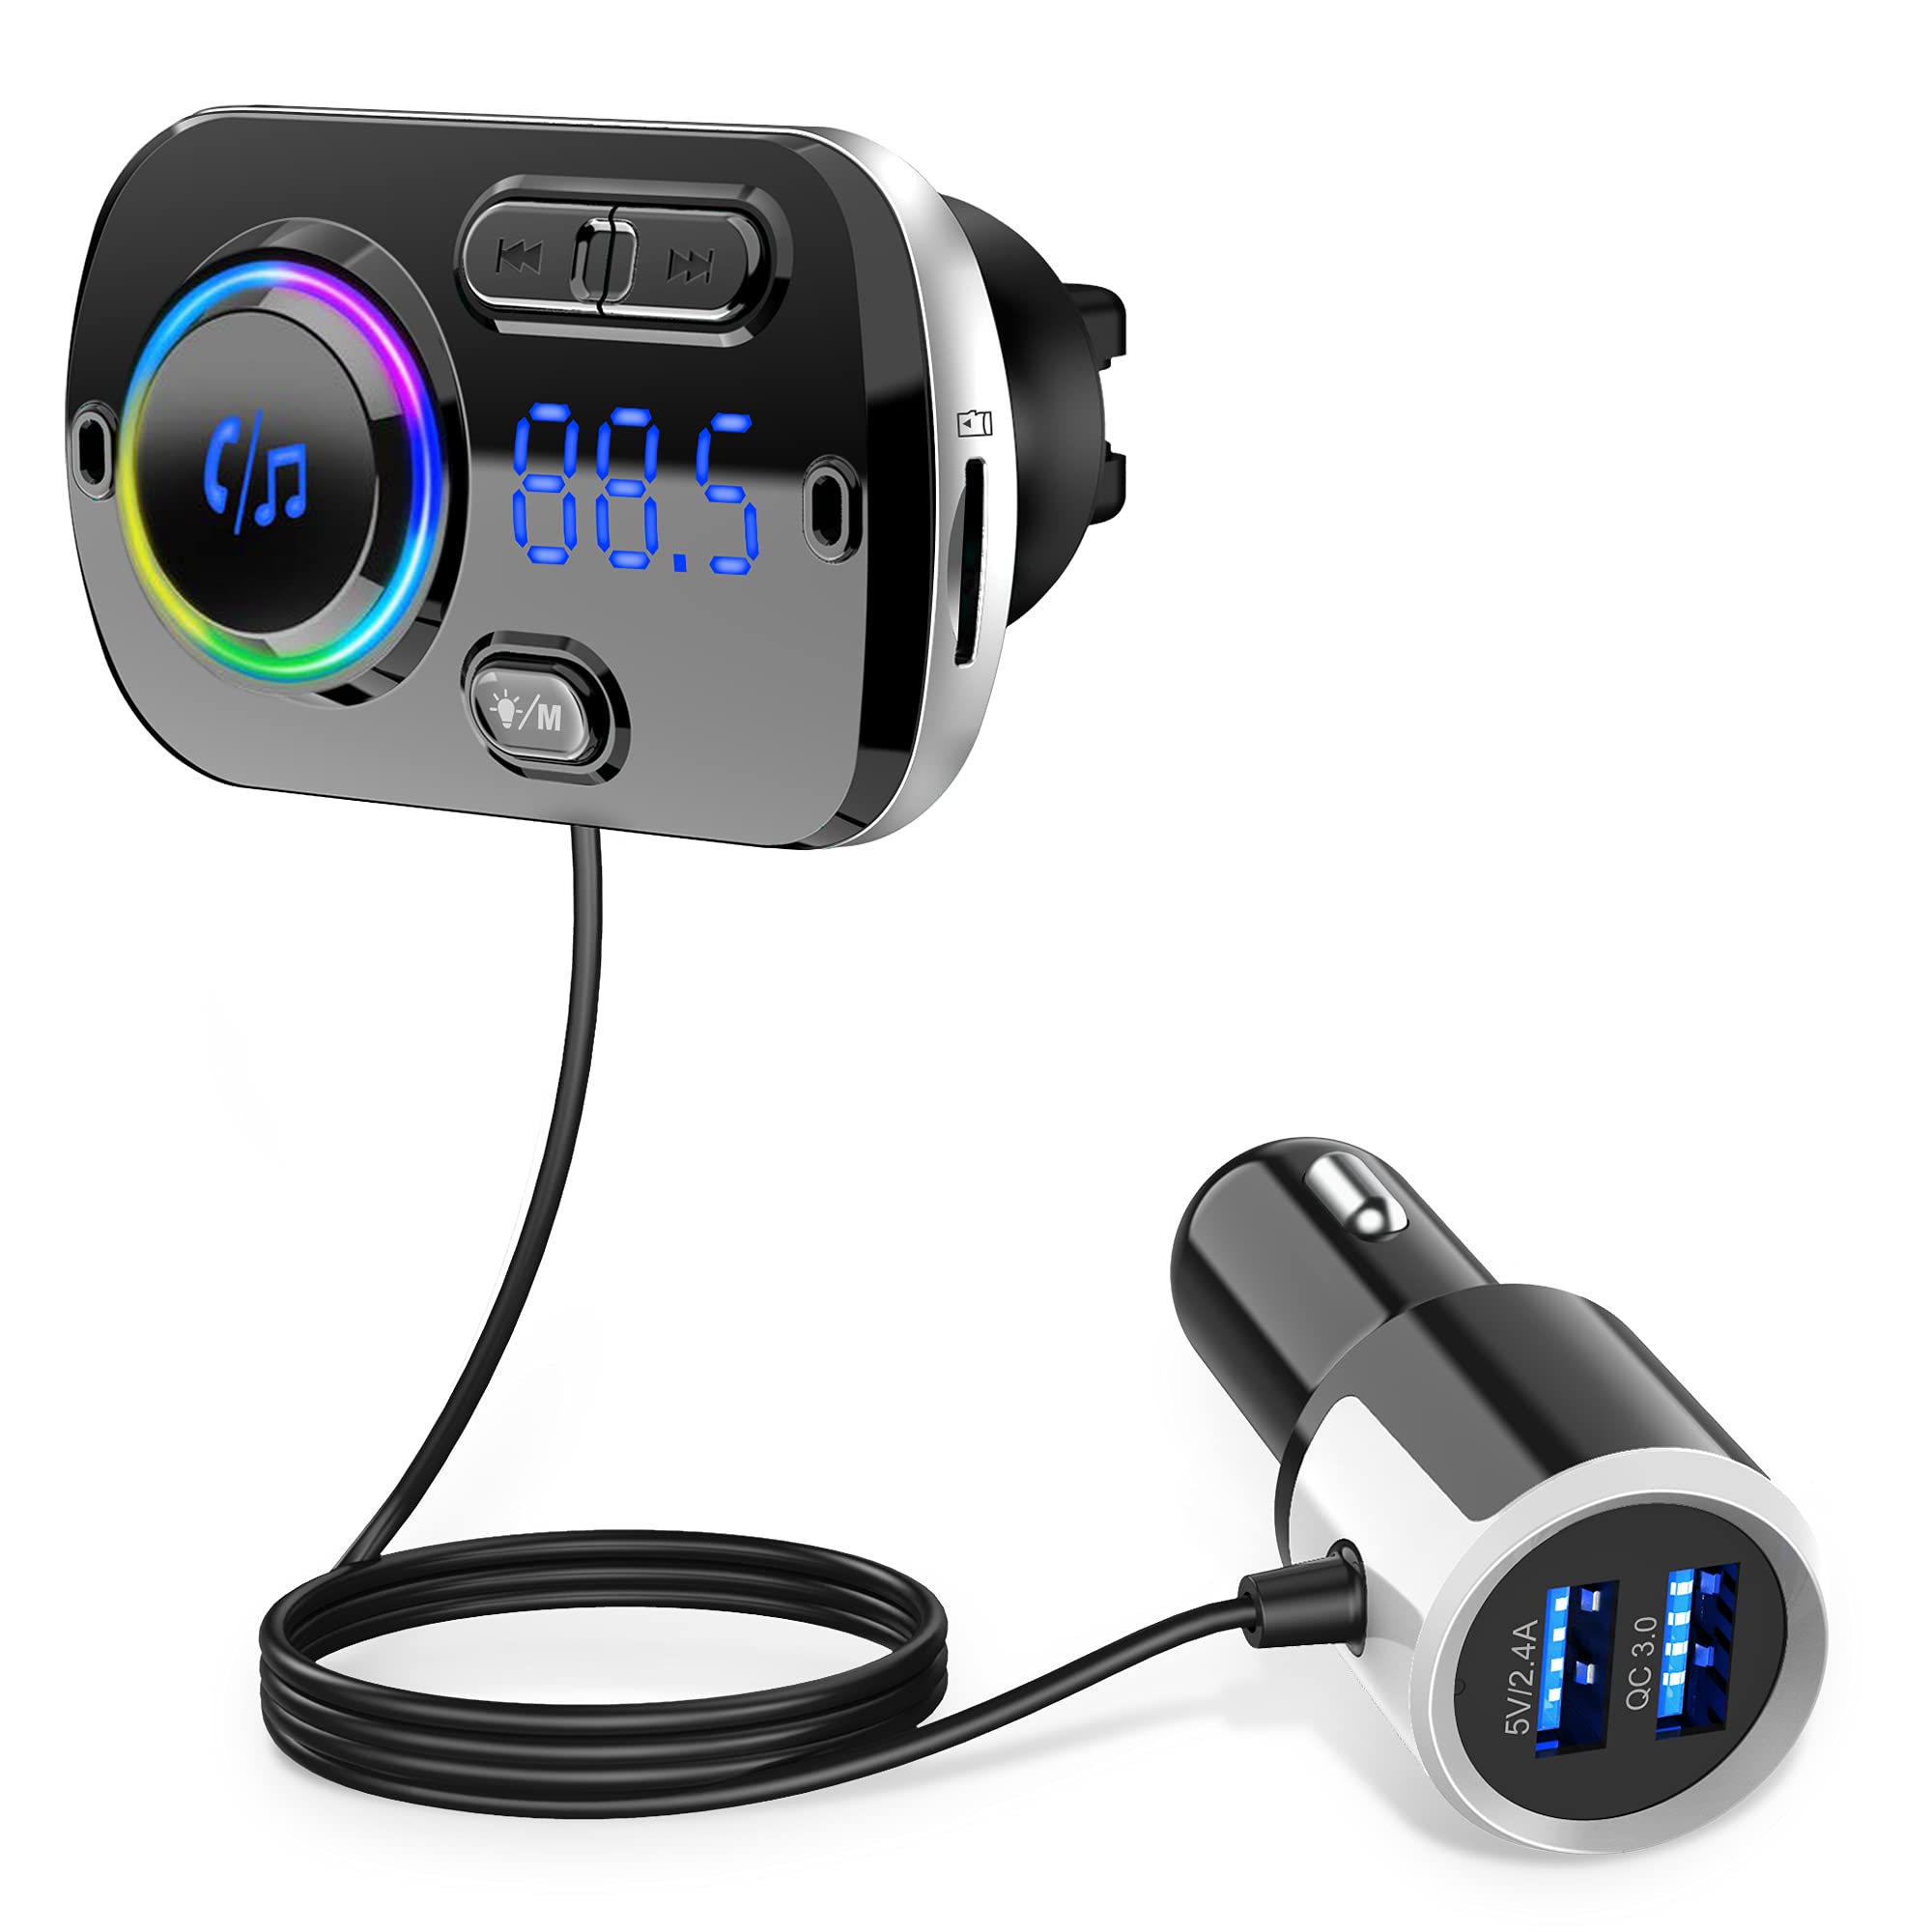 Car Bluetooth Transmitter, Car Radio Bluetooth FM Transmitter Handsfree Car Kit with QC3.0 USB Car Charger, 7 Color Lights, 2 Install Ways, Support TF Card AUX Input, Microphone CVC Noise Reduction